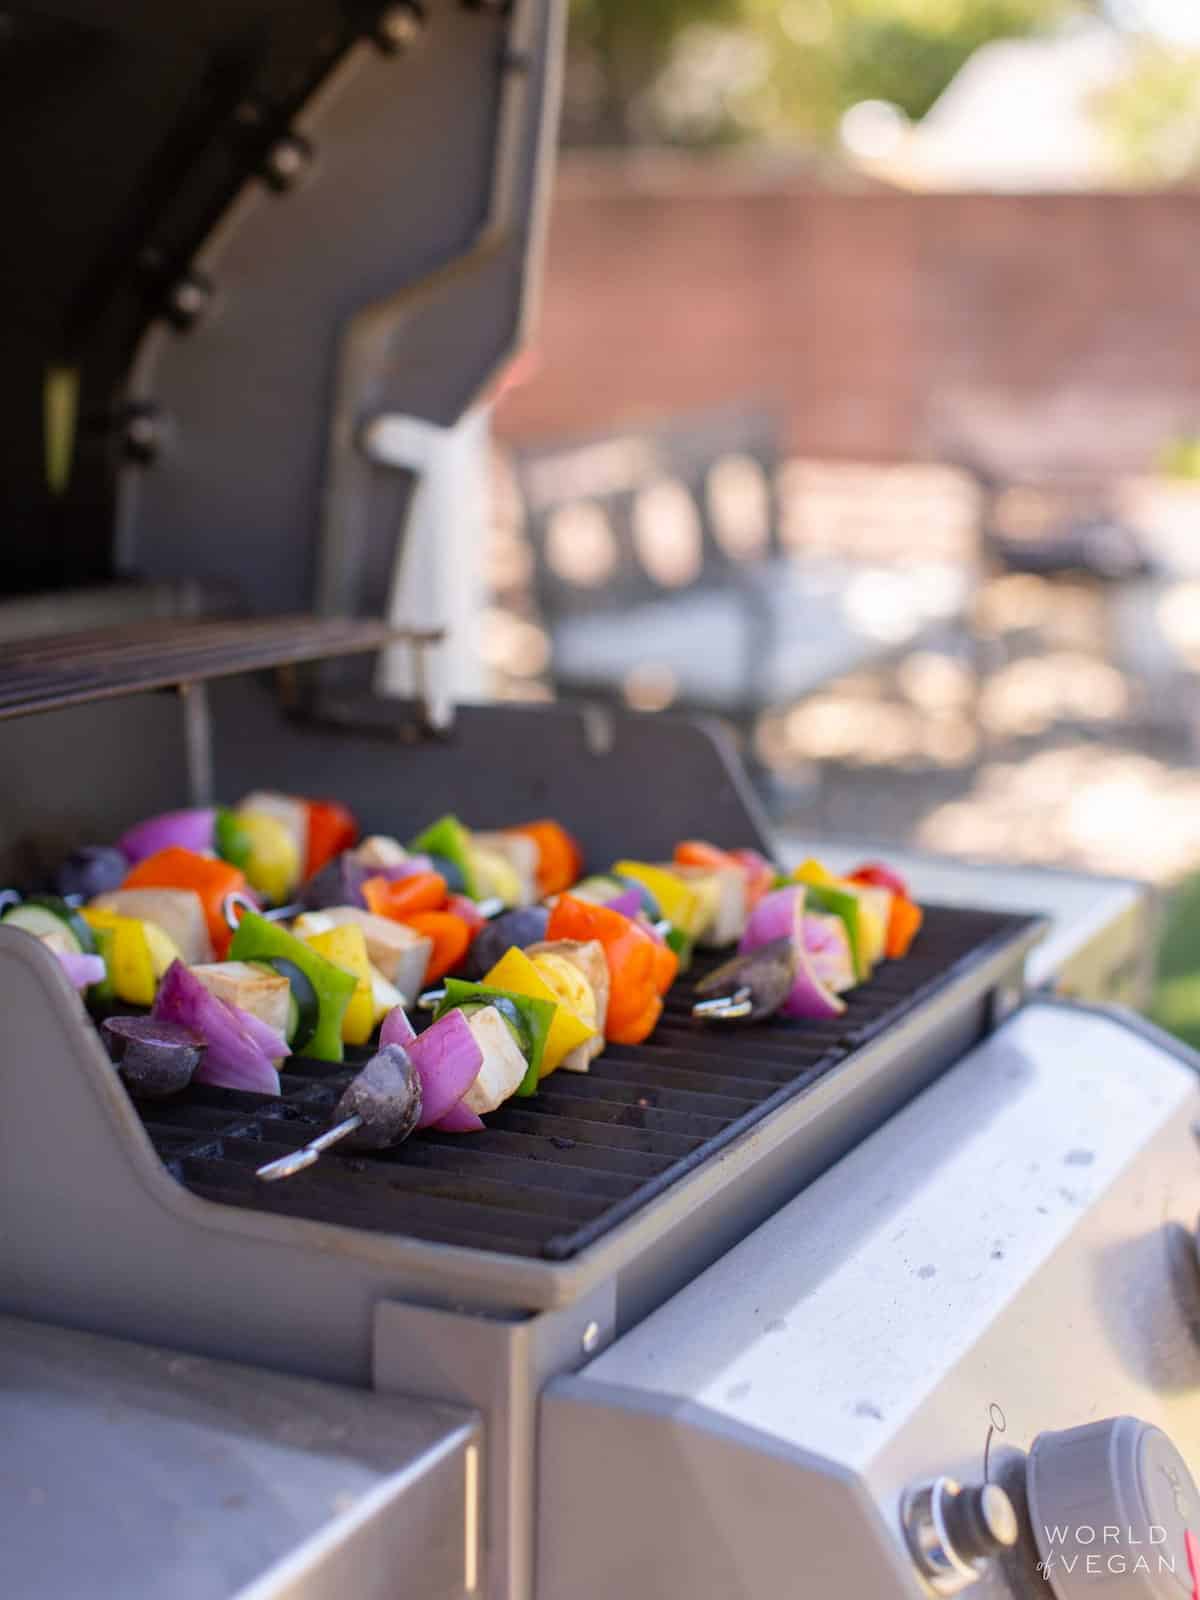 Tofu kebabs on a grill.